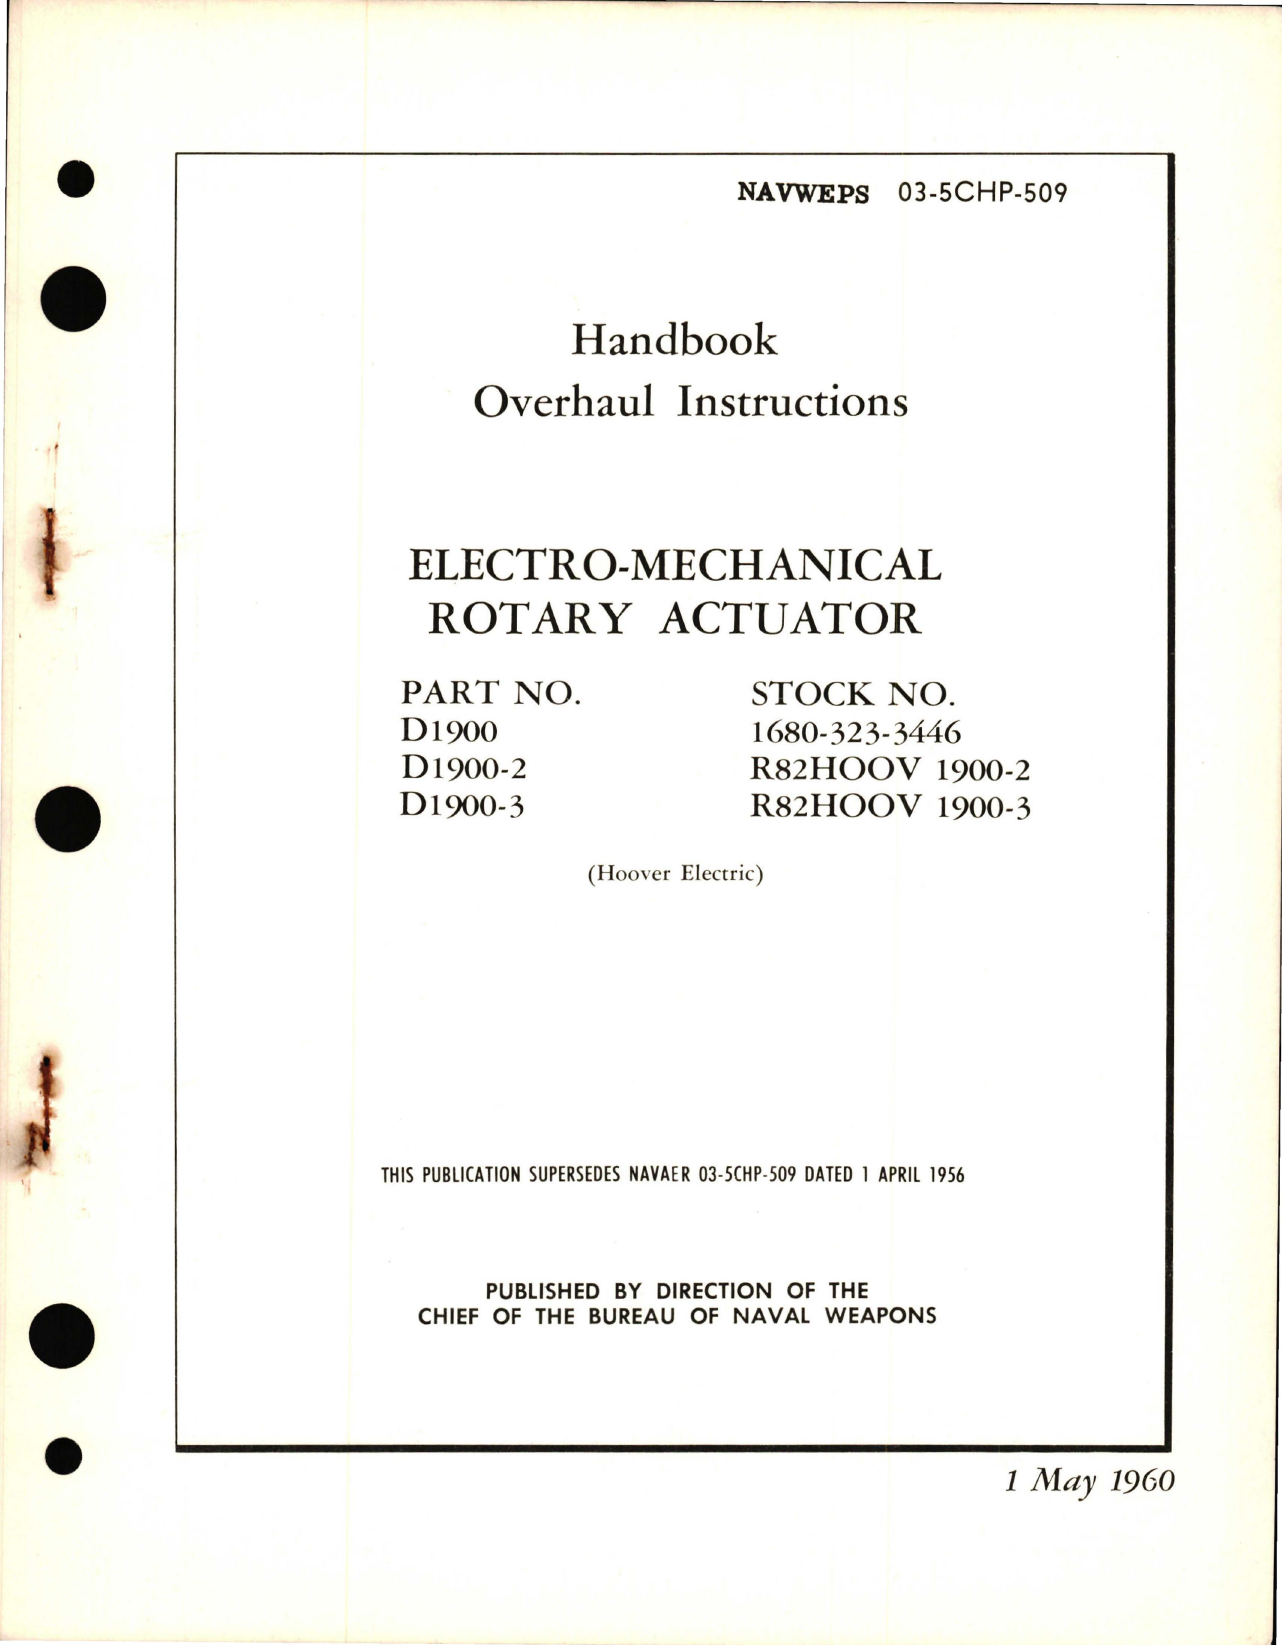 Sample page 1 from AirCorps Library document: Overhaul Instructions for Electro-Mechanical Rotary Actuator Parts D1900, D1900-2, D1900-3 (Hoover) 